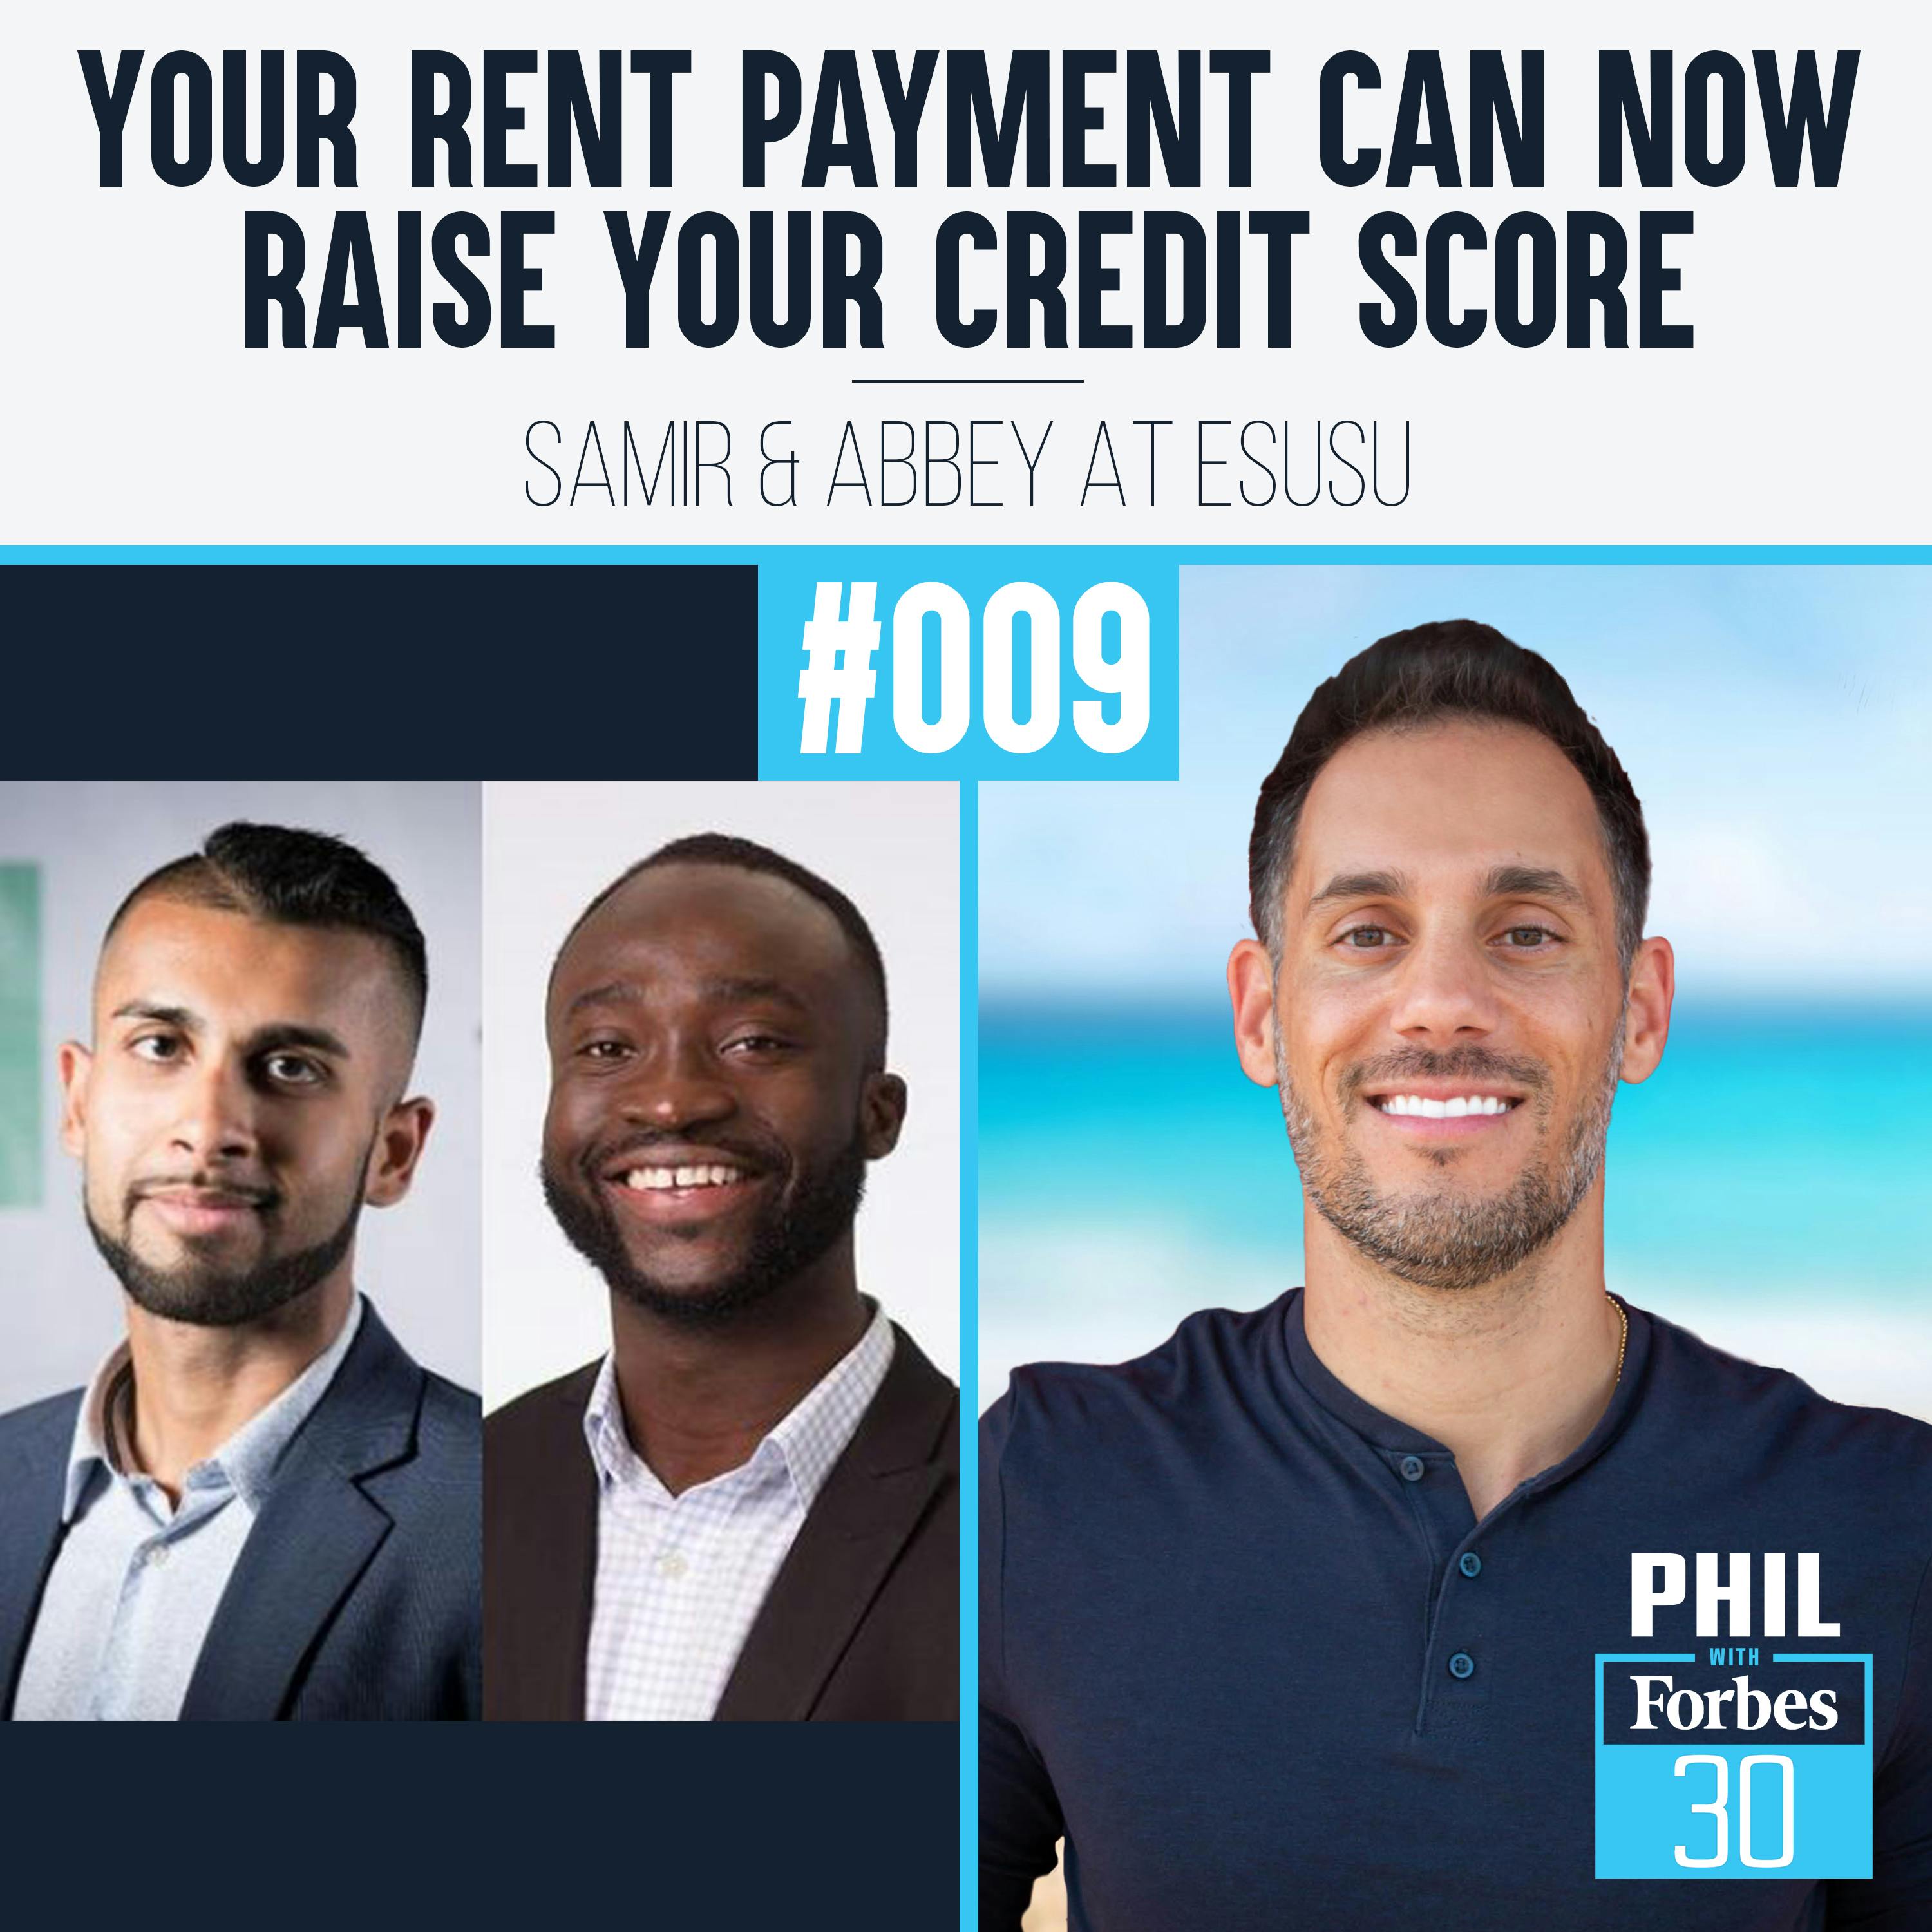 009 | ”Your Rent Payment Can Now Raise Your Credit Score” (Samir & Abbey at Esusu)